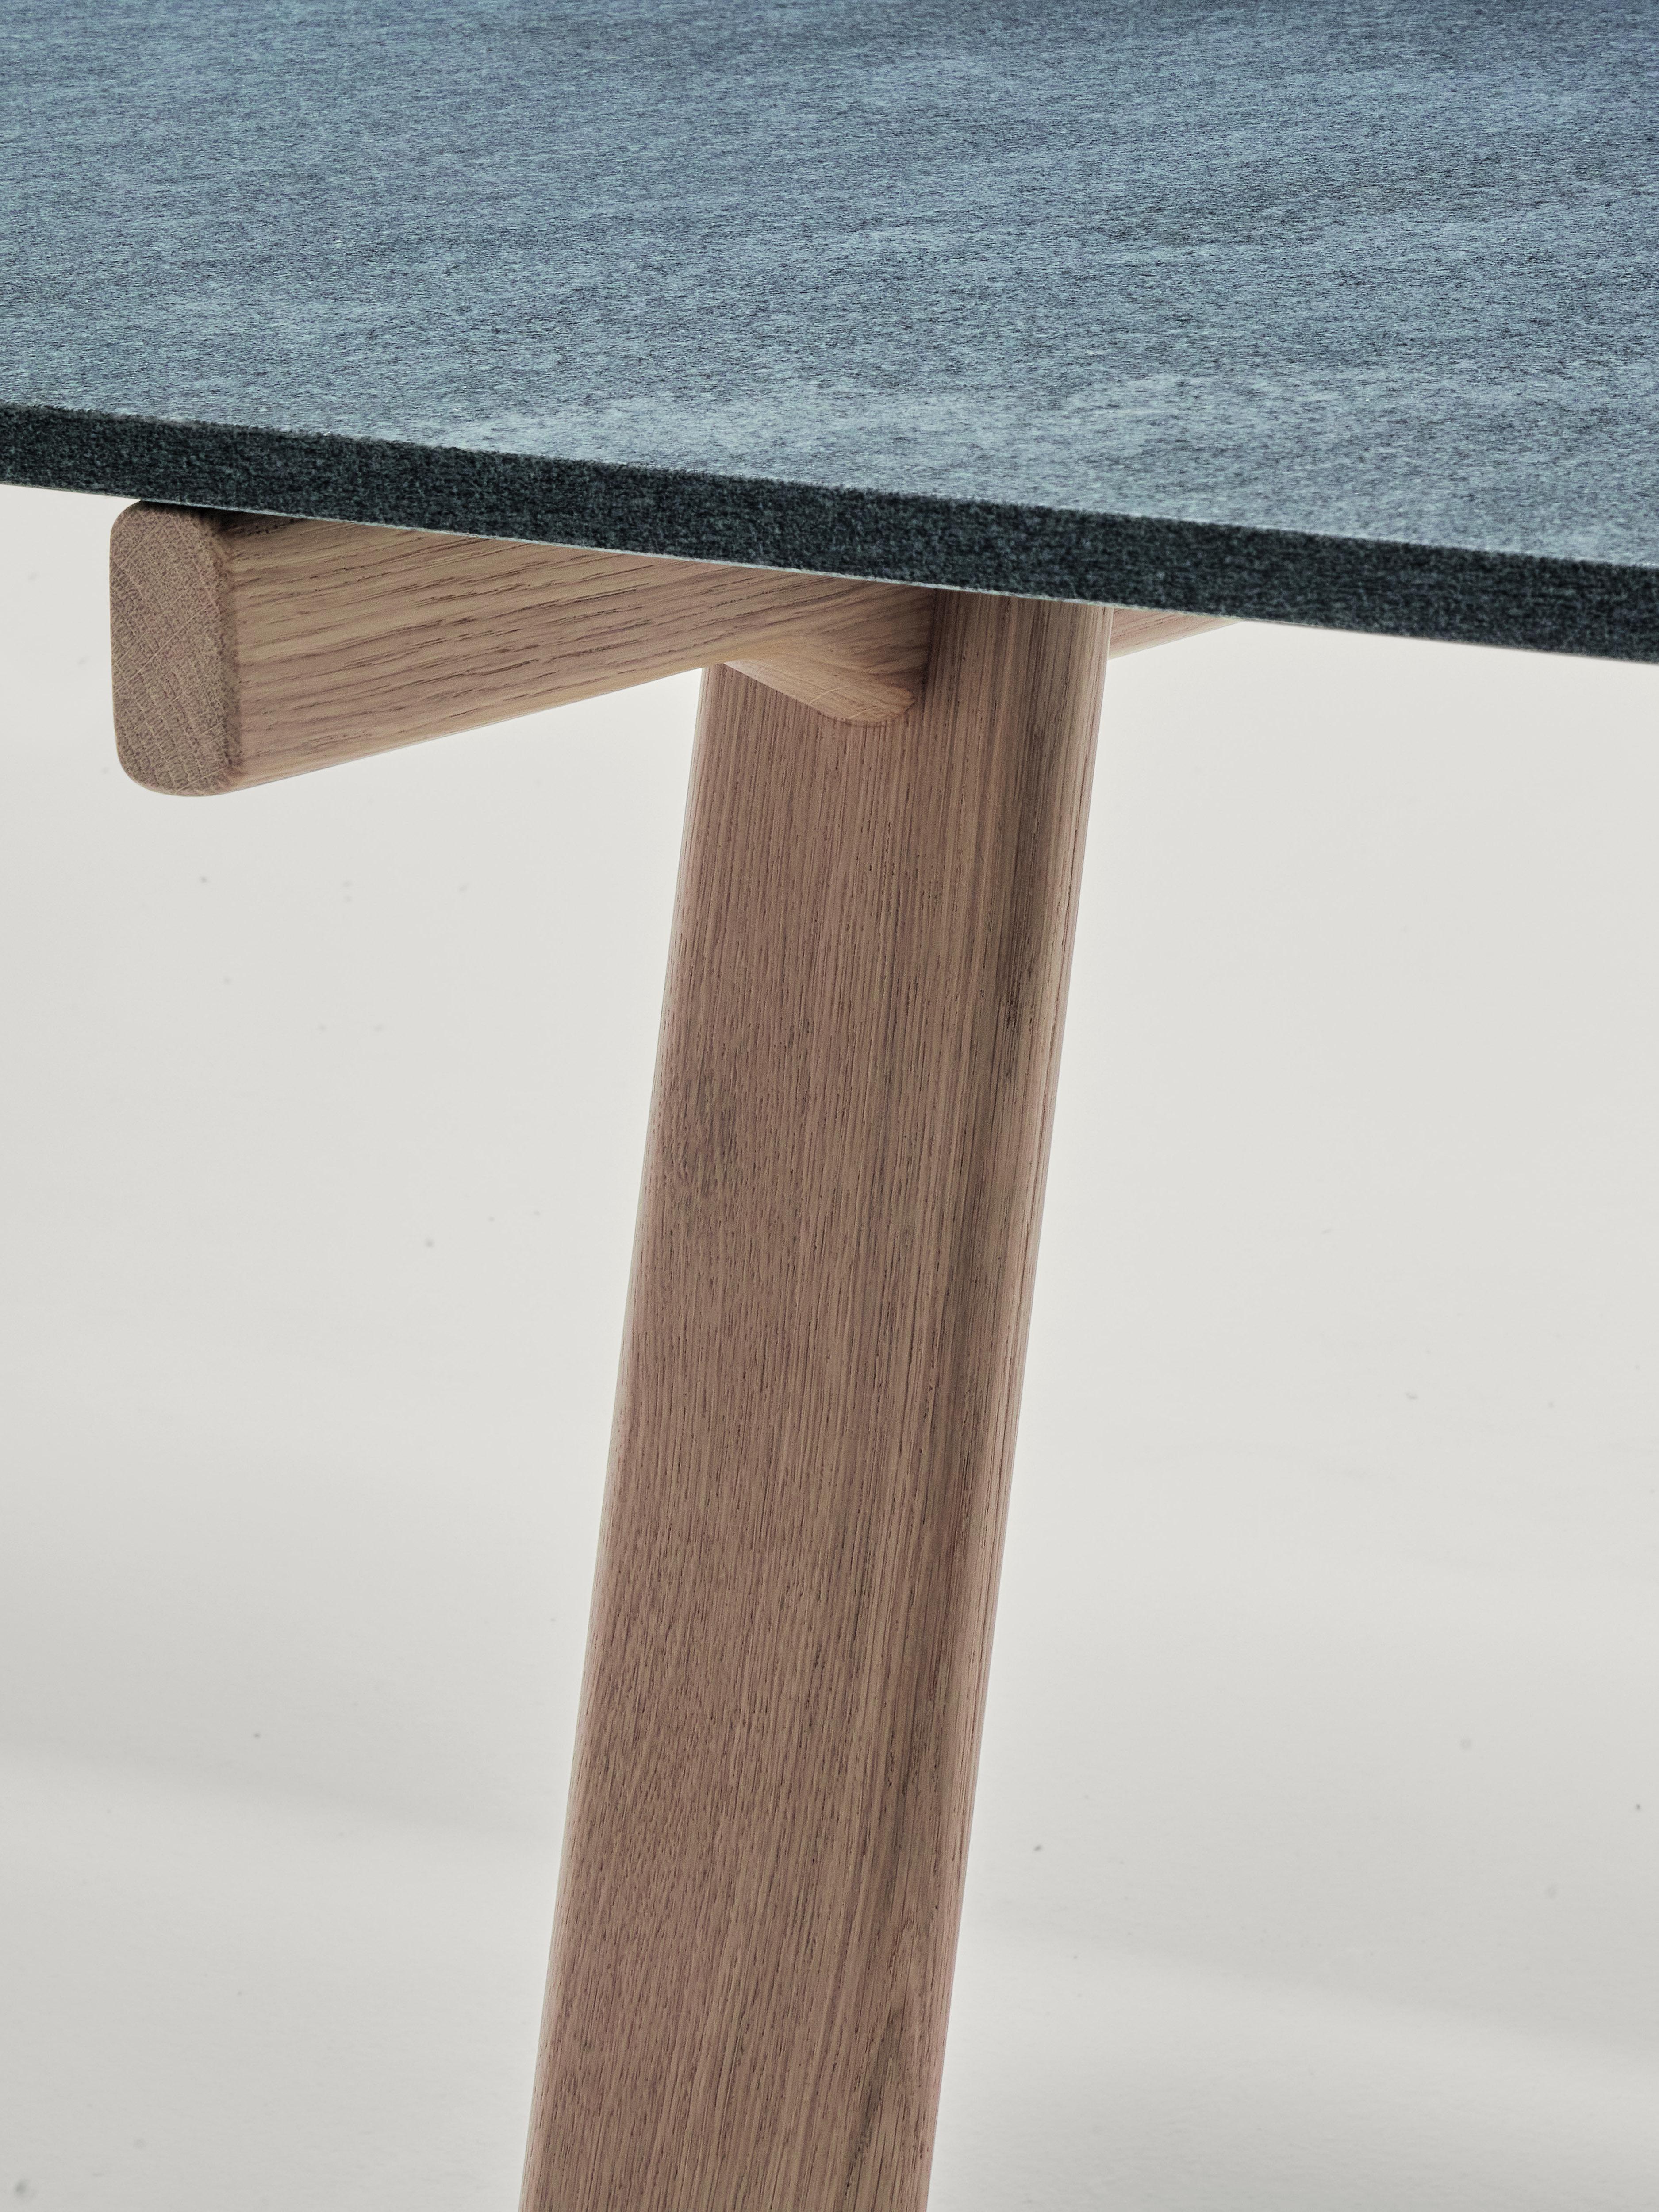 Zanotta Large Ambrosiano Table in Onsernone Stone Top with Natural Oak Frame by Mist-o

Trestles in solid natural oak or painted black with open pore. Matt black painted stainless steel spars. Top available either in 1/2” thick smoky grey tempered